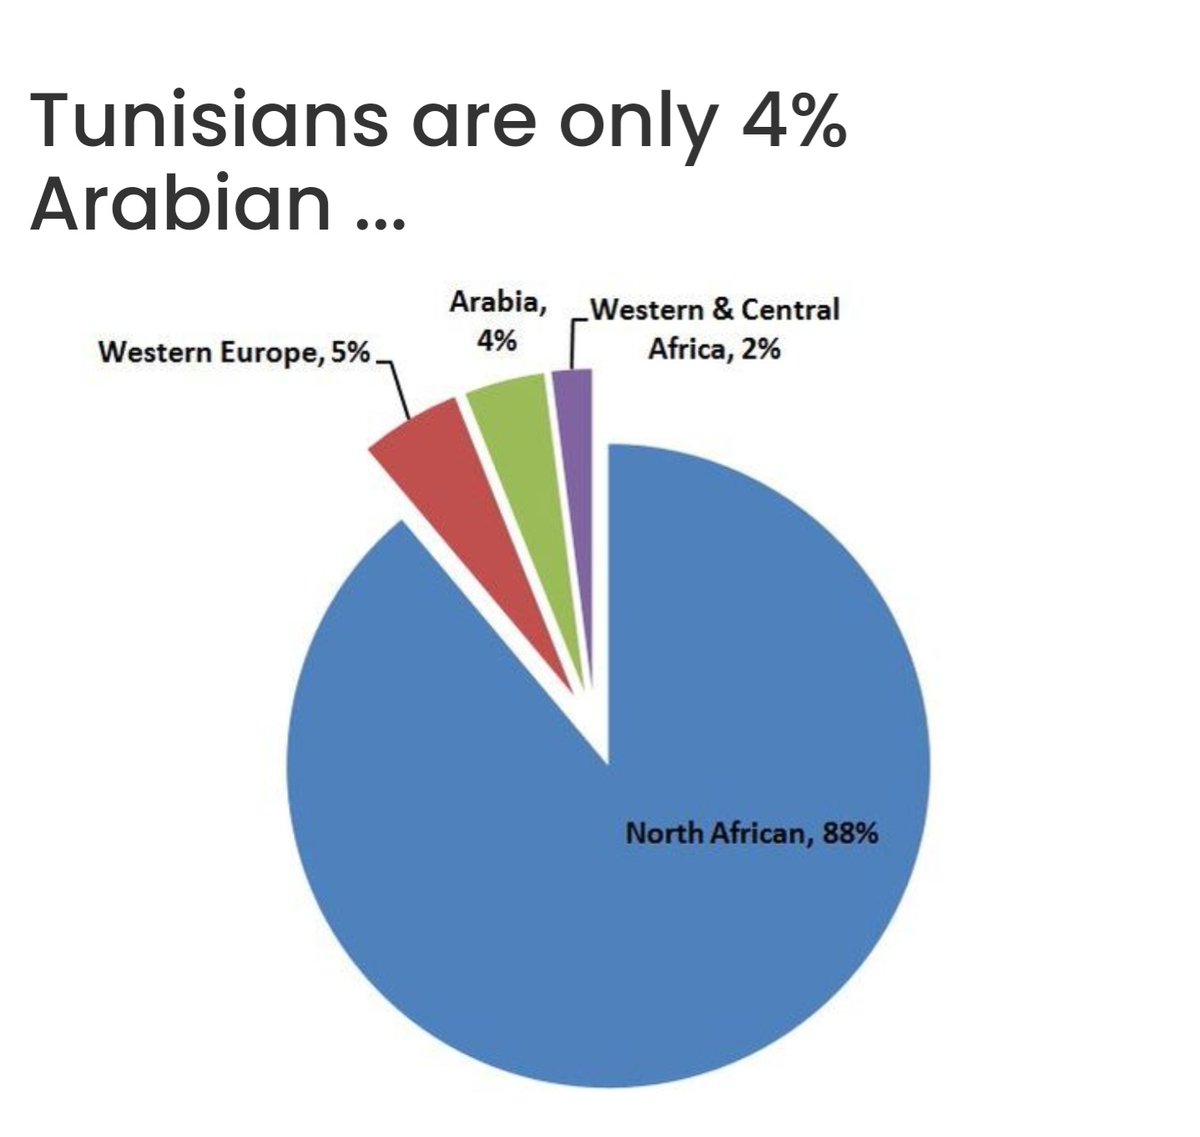 Persian genealogy, they share up to 70% with Behrain and UAE populations Yet persians are not arabsTunisia share only 4% genetic linkage with arabsYet they are arabArabism is not genetic related, it's a shared language, religion, politics and culture 